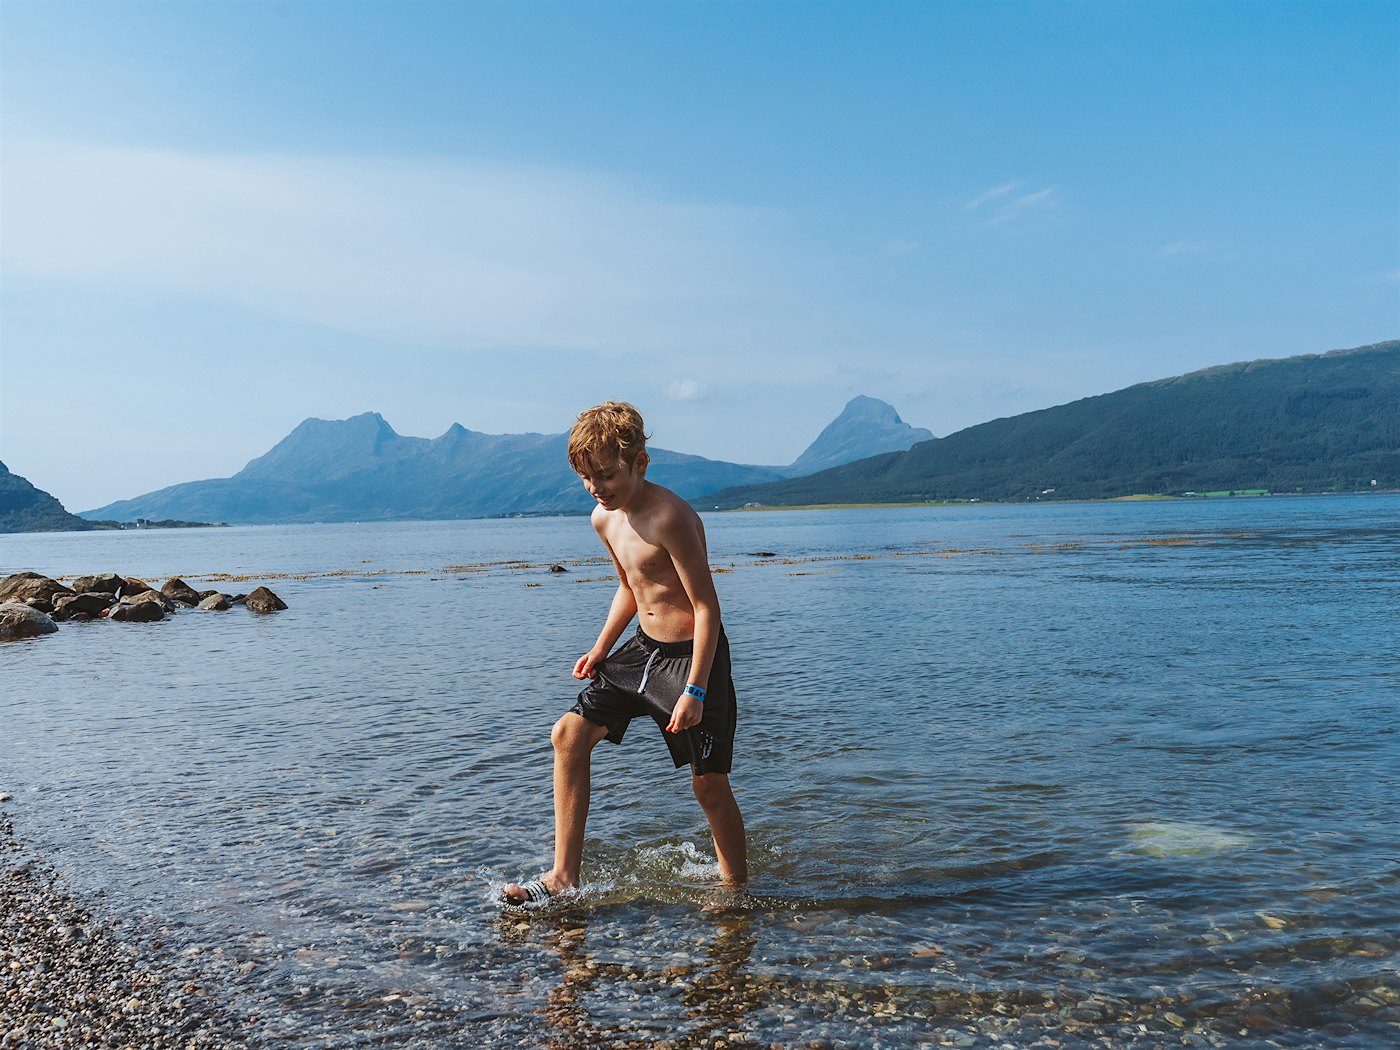 Boy bathing in the sea with mountains in the background. Photo